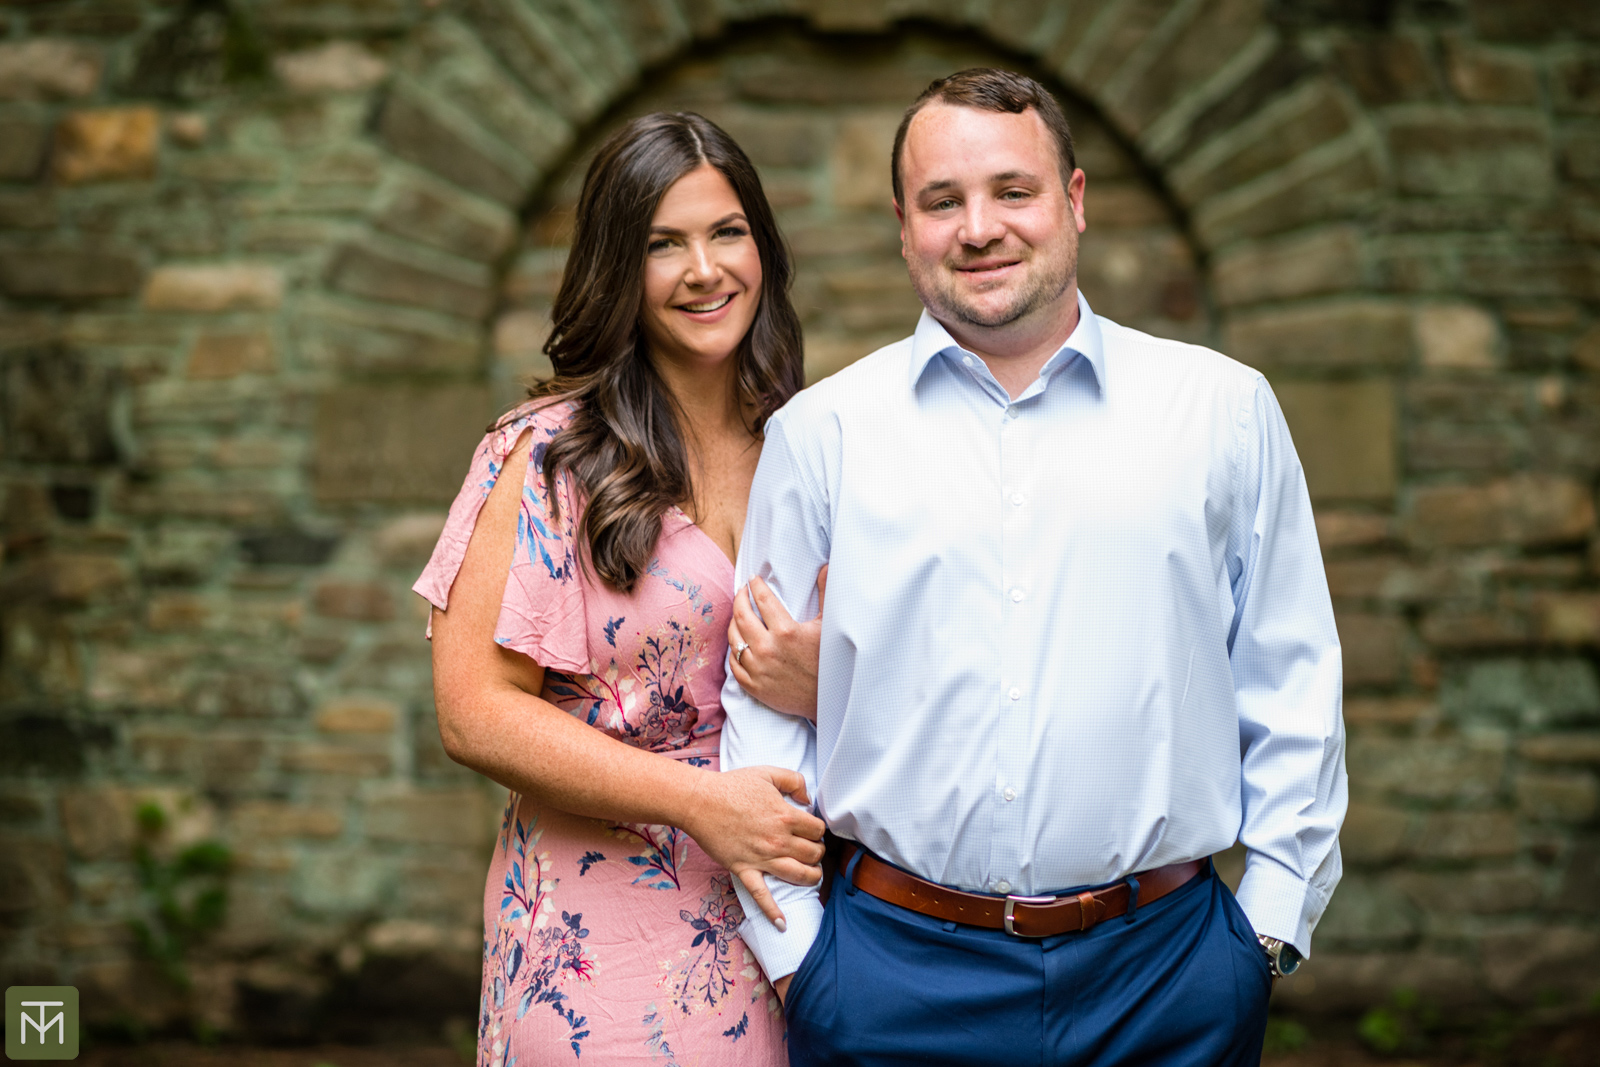 Colleen & Matthew {E-session by Tessa} – Tessa Marie Images